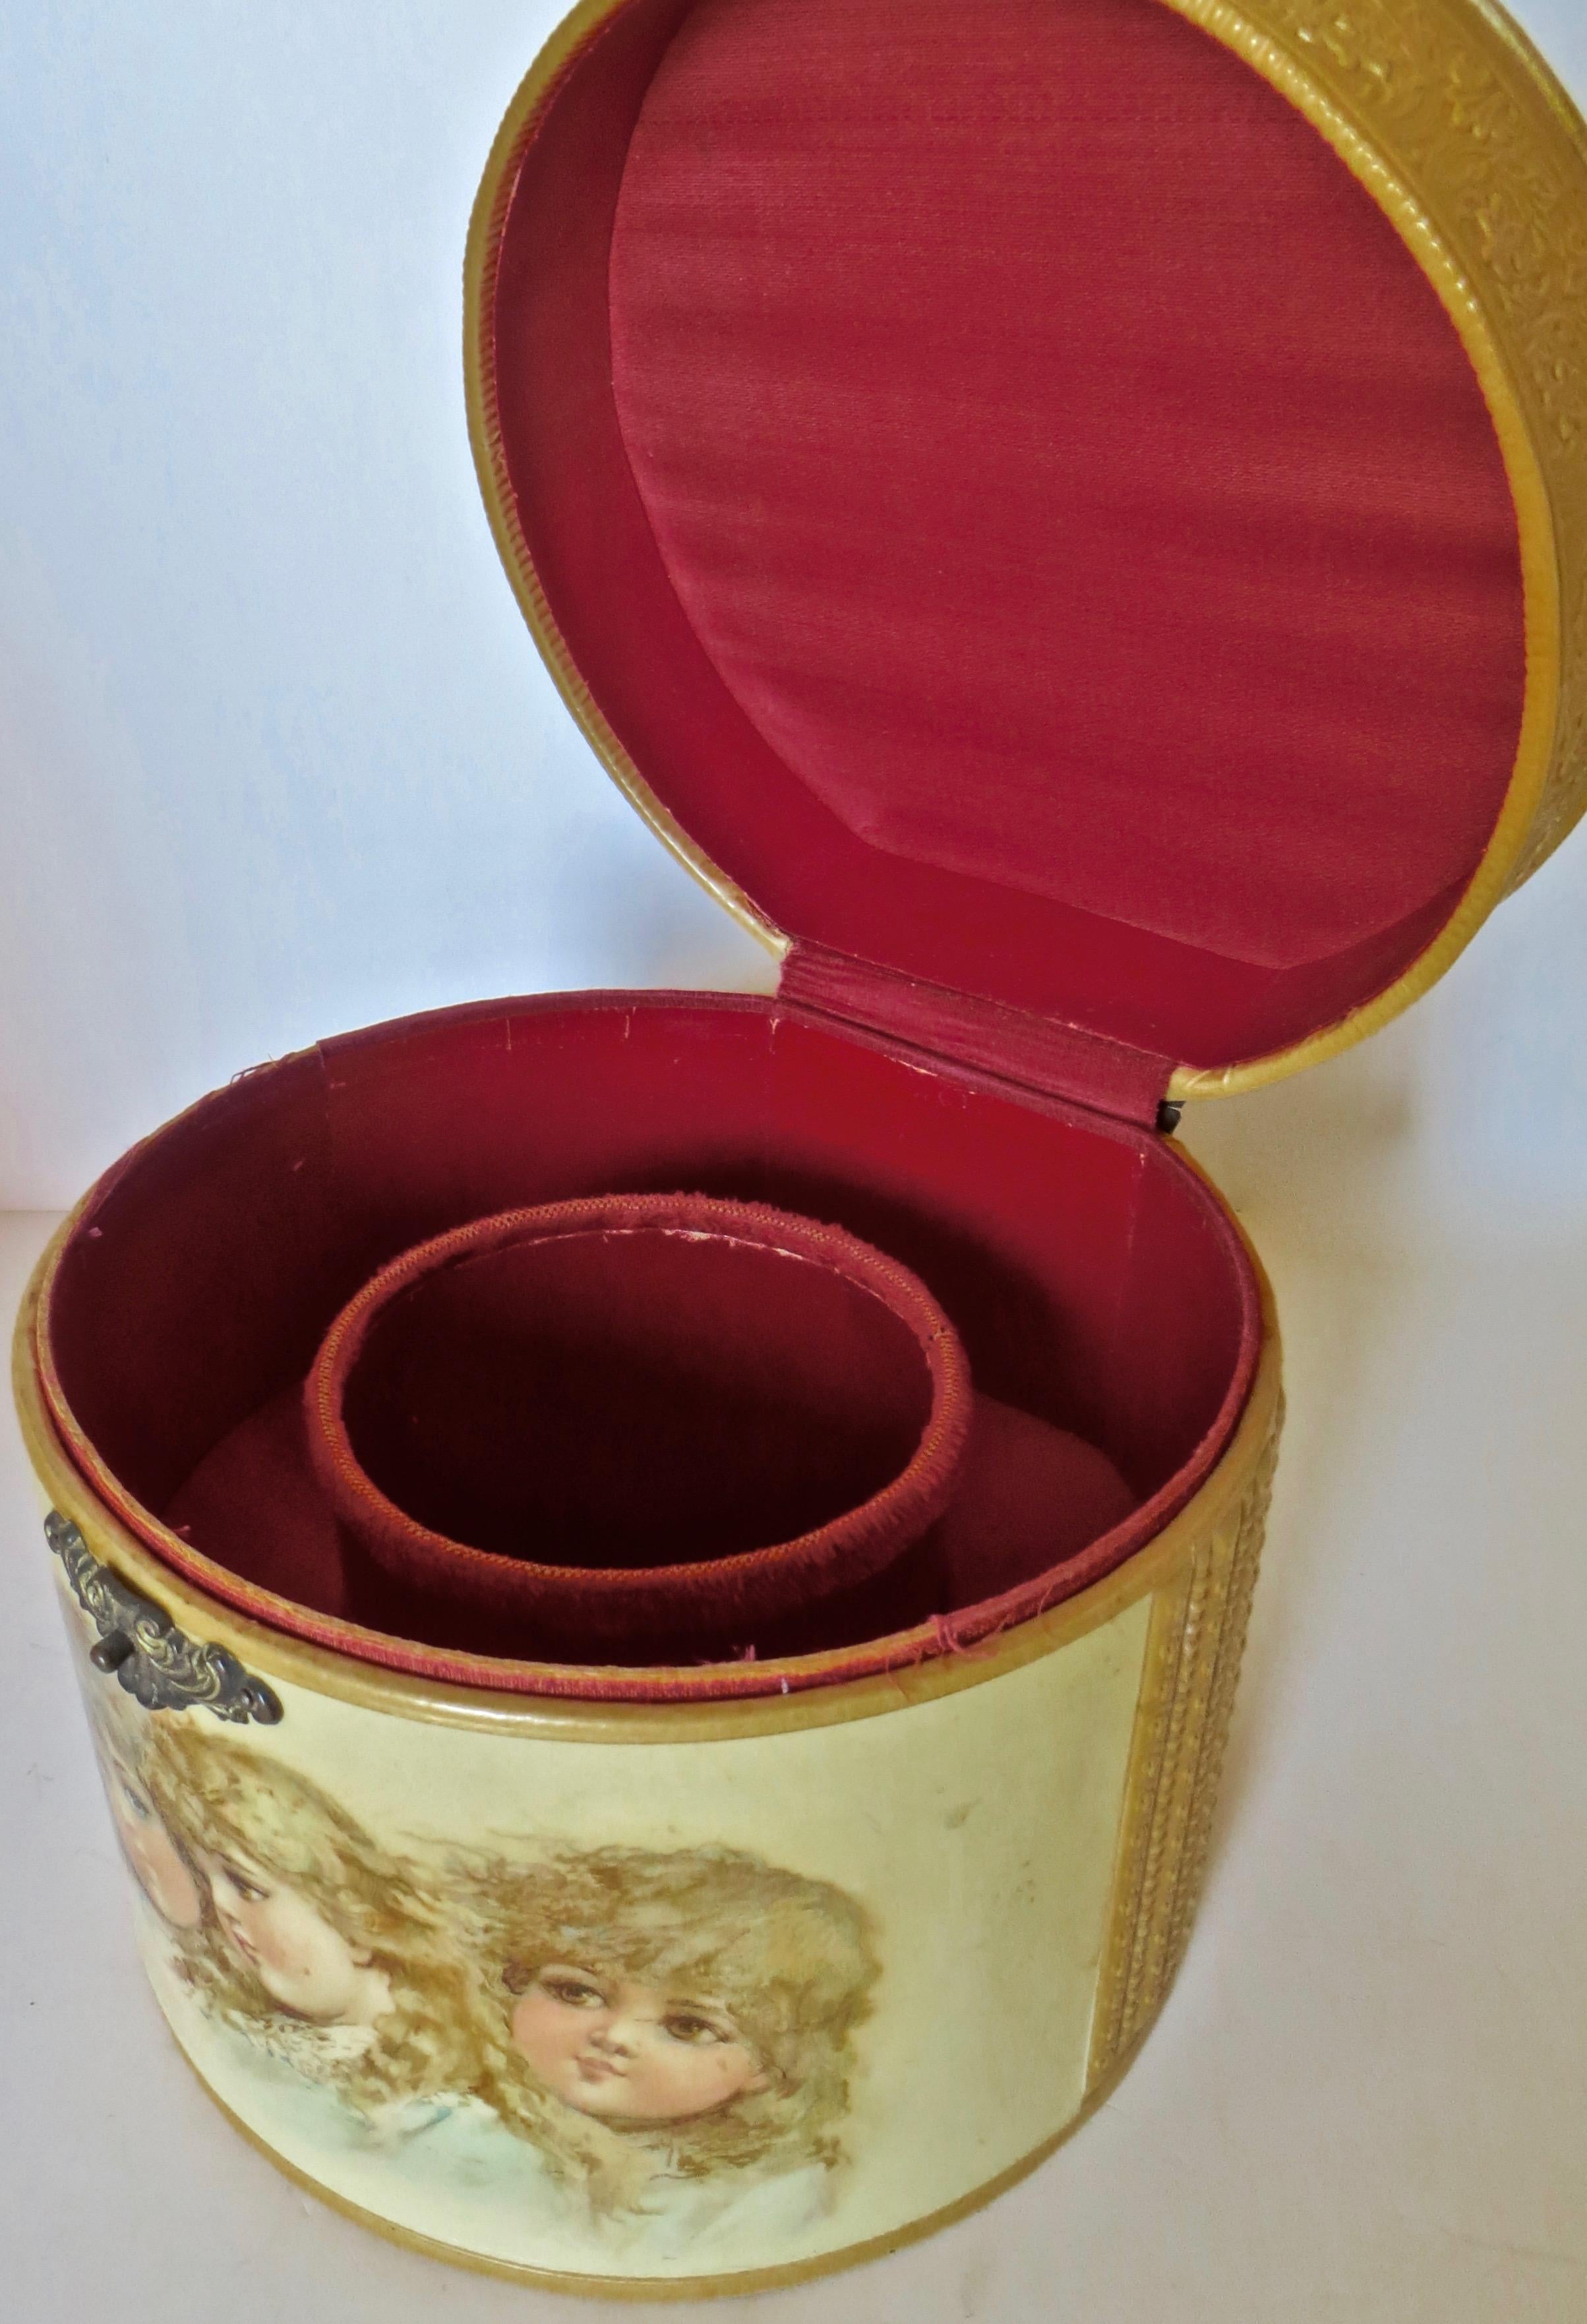 A very unusual and unique item, this Victorian Celluloid collar box is seldom found or even identified as such. The beige colored collar box is highly lithographed in great detail with lifelike colors and a cream colored background. The facing